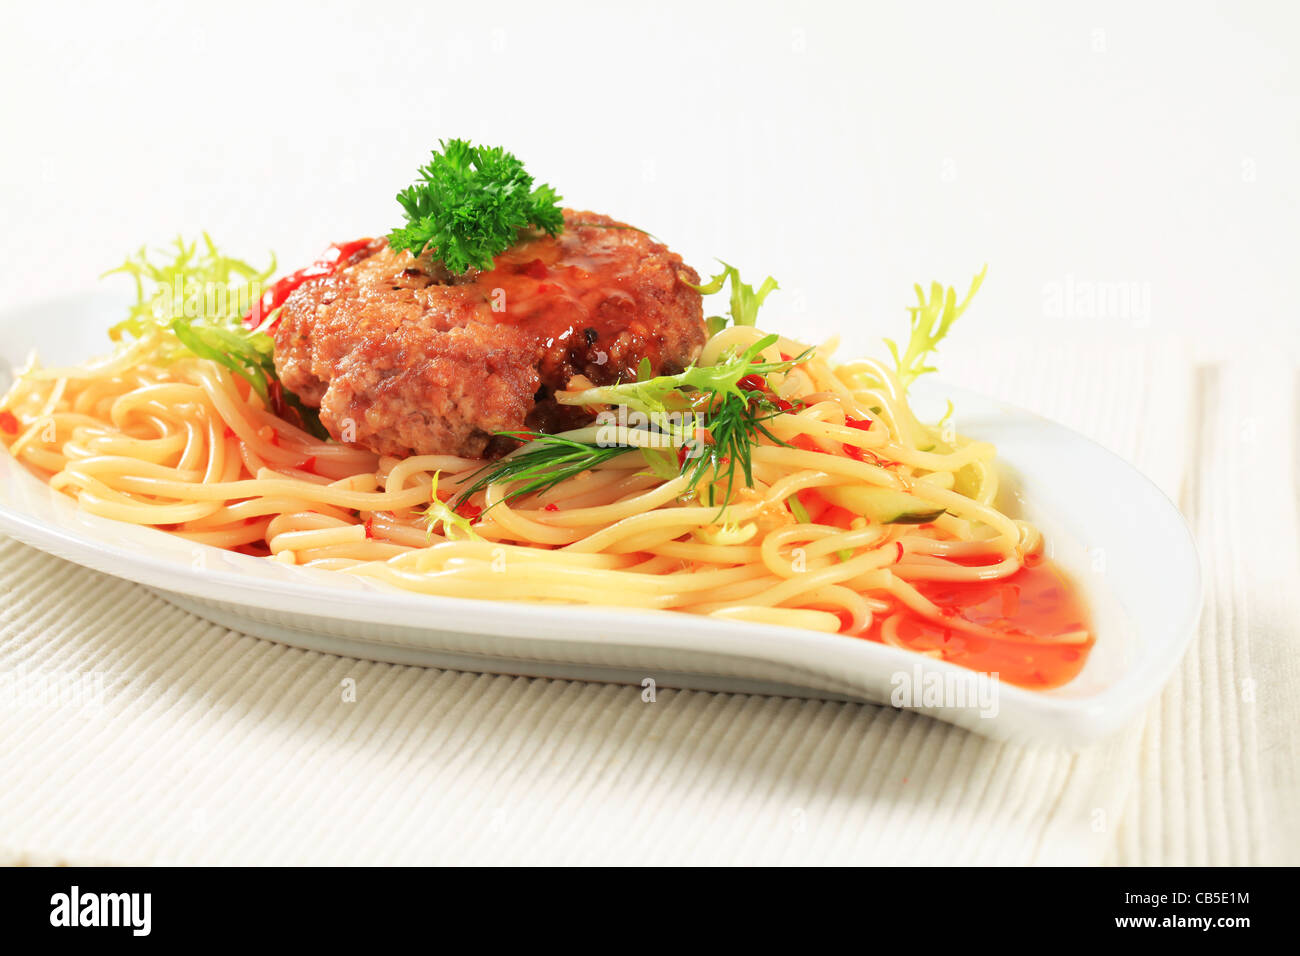 Meat patty with spaghetti and spicy sauce Stock Photo